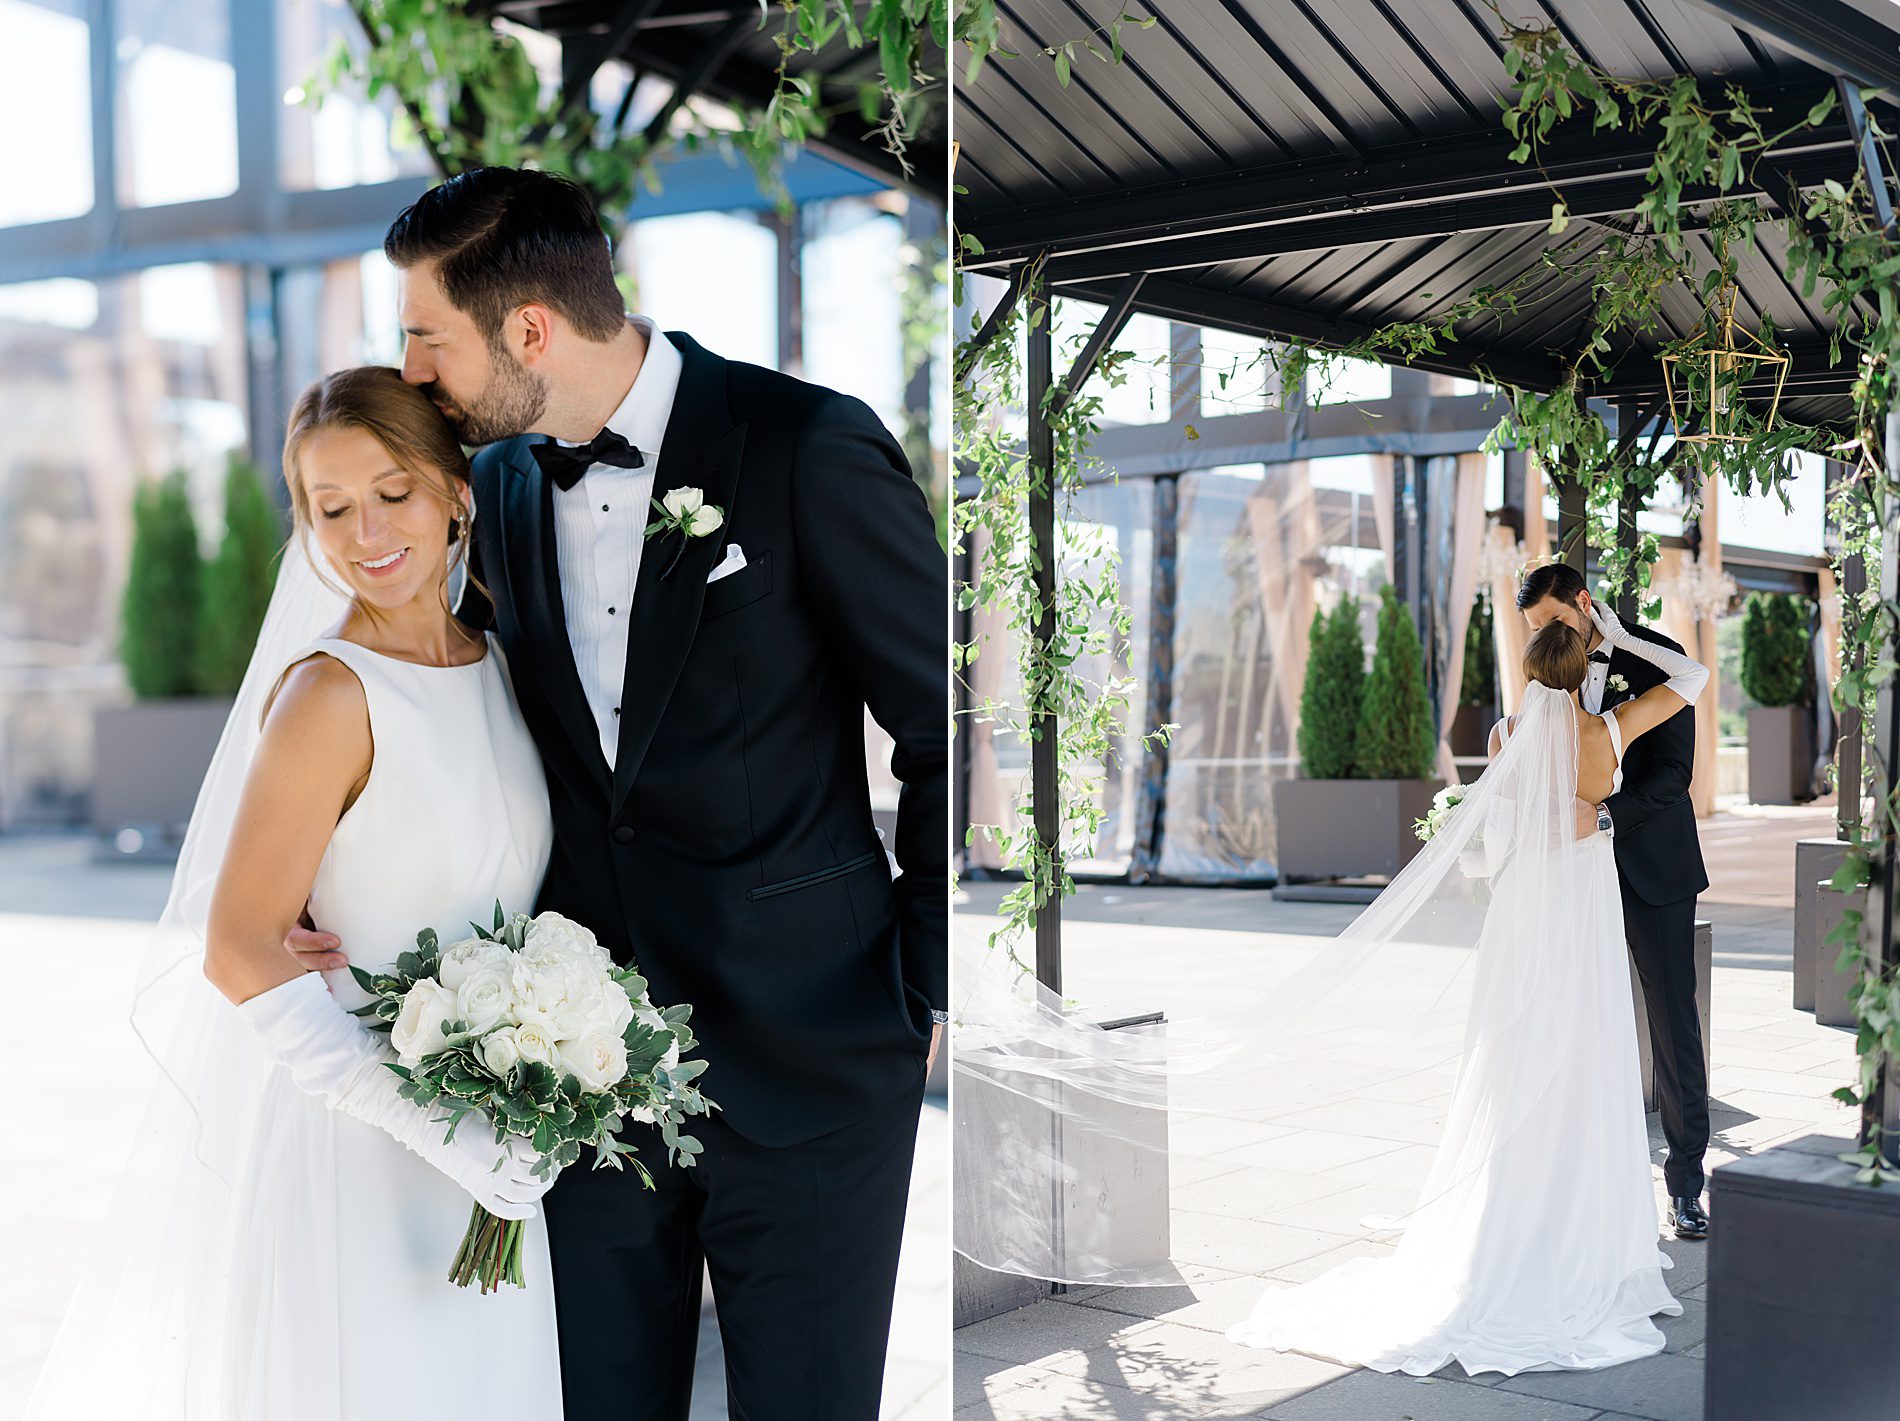 wedding portraits from Classic + Elegant Philadelphia Wedding at Water Works by Cescaphe